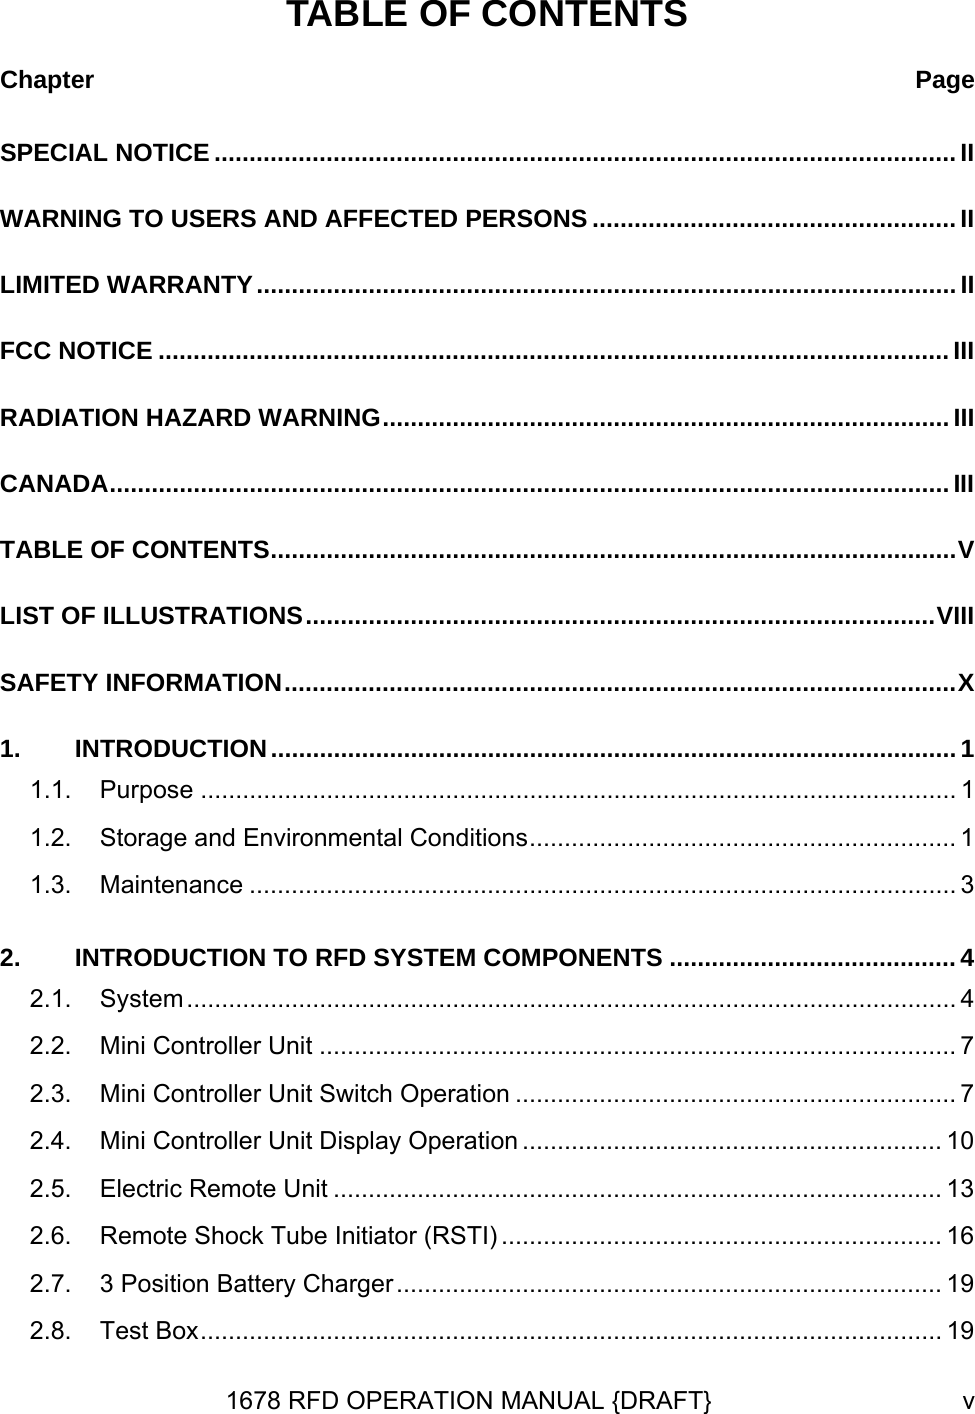 TABLE OF CONTENTS Chapter  PageSPECIAL NOTICE .......................................................................................................... II WARNING TO USERS AND AFFECTED PERSONS .................................................... II LIMITED WARRANTY....................................................................................................II FCC NOTICE ................................................................................................................. III RADIATION HAZARD WARNING.................................................................................III CANADA........................................................................................................................ III TABLE OF CONTENTS..................................................................................................V LIST OF ILLUSTRATIONS..........................................................................................VIII SAFETY INFORMATION................................................................................................X 1. INTRODUCTION.................................................................................................. 1 1.1. Purpose ............................................................................................................ 1 1.2. Storage and Environmental Conditions............................................................. 1 1.3. Maintenance ..................................................................................................... 3 2. INTRODUCTION TO RFD SYSTEM COMPONENTS ......................................... 4 2.1. System.............................................................................................................. 4 2.2. Mini Controller Unit ........................................................................................... 7 2.3. Mini Controller Unit Switch Operation ............................................................... 7 2.4. Mini Controller Unit Display Operation ............................................................ 10 2.5. Electric Remote Unit ....................................................................................... 13 2.6. Remote Shock Tube Initiator (RSTI) ............................................................... 16 2.7. 3 Position Battery Charger.............................................................................. 19 2.8. Test Box.......................................................................................................... 19 1678 RFD OPERATION MANUAL {DRAFT}  v